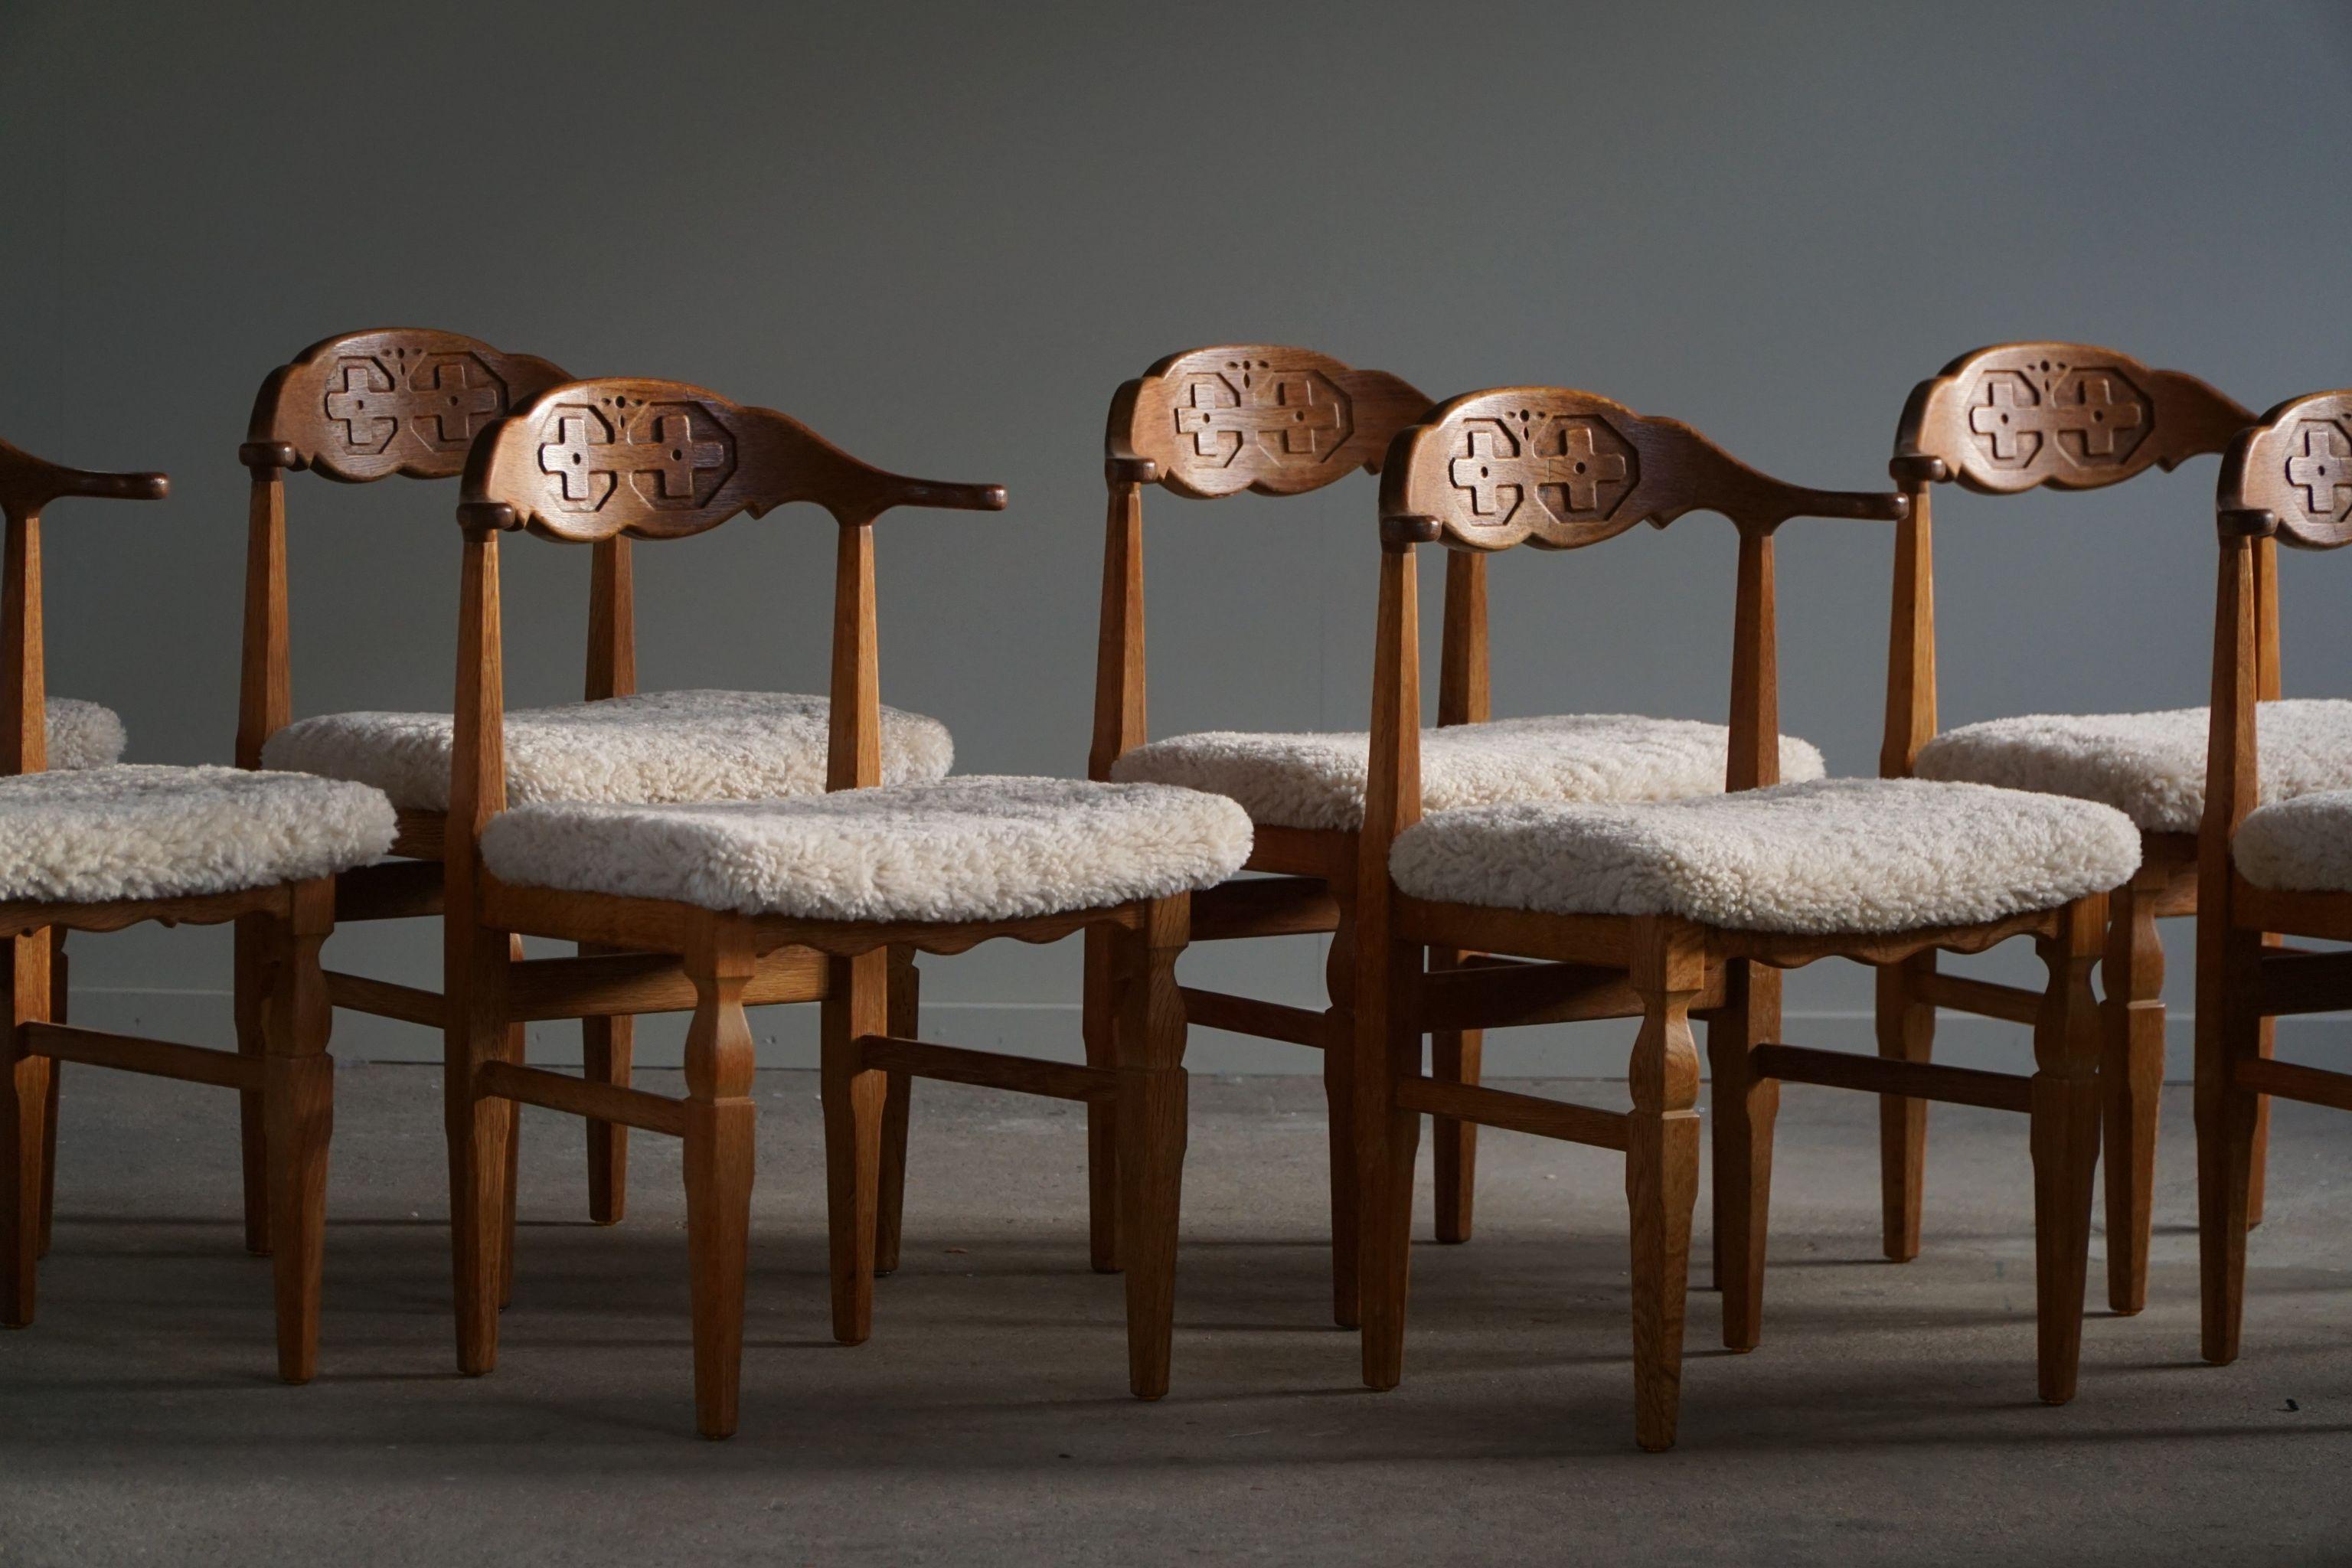 Such a magnificent set of 8 dining chairs in oak, seats reupholstered in great quality shearling lambswool. Strong references to the other popular 